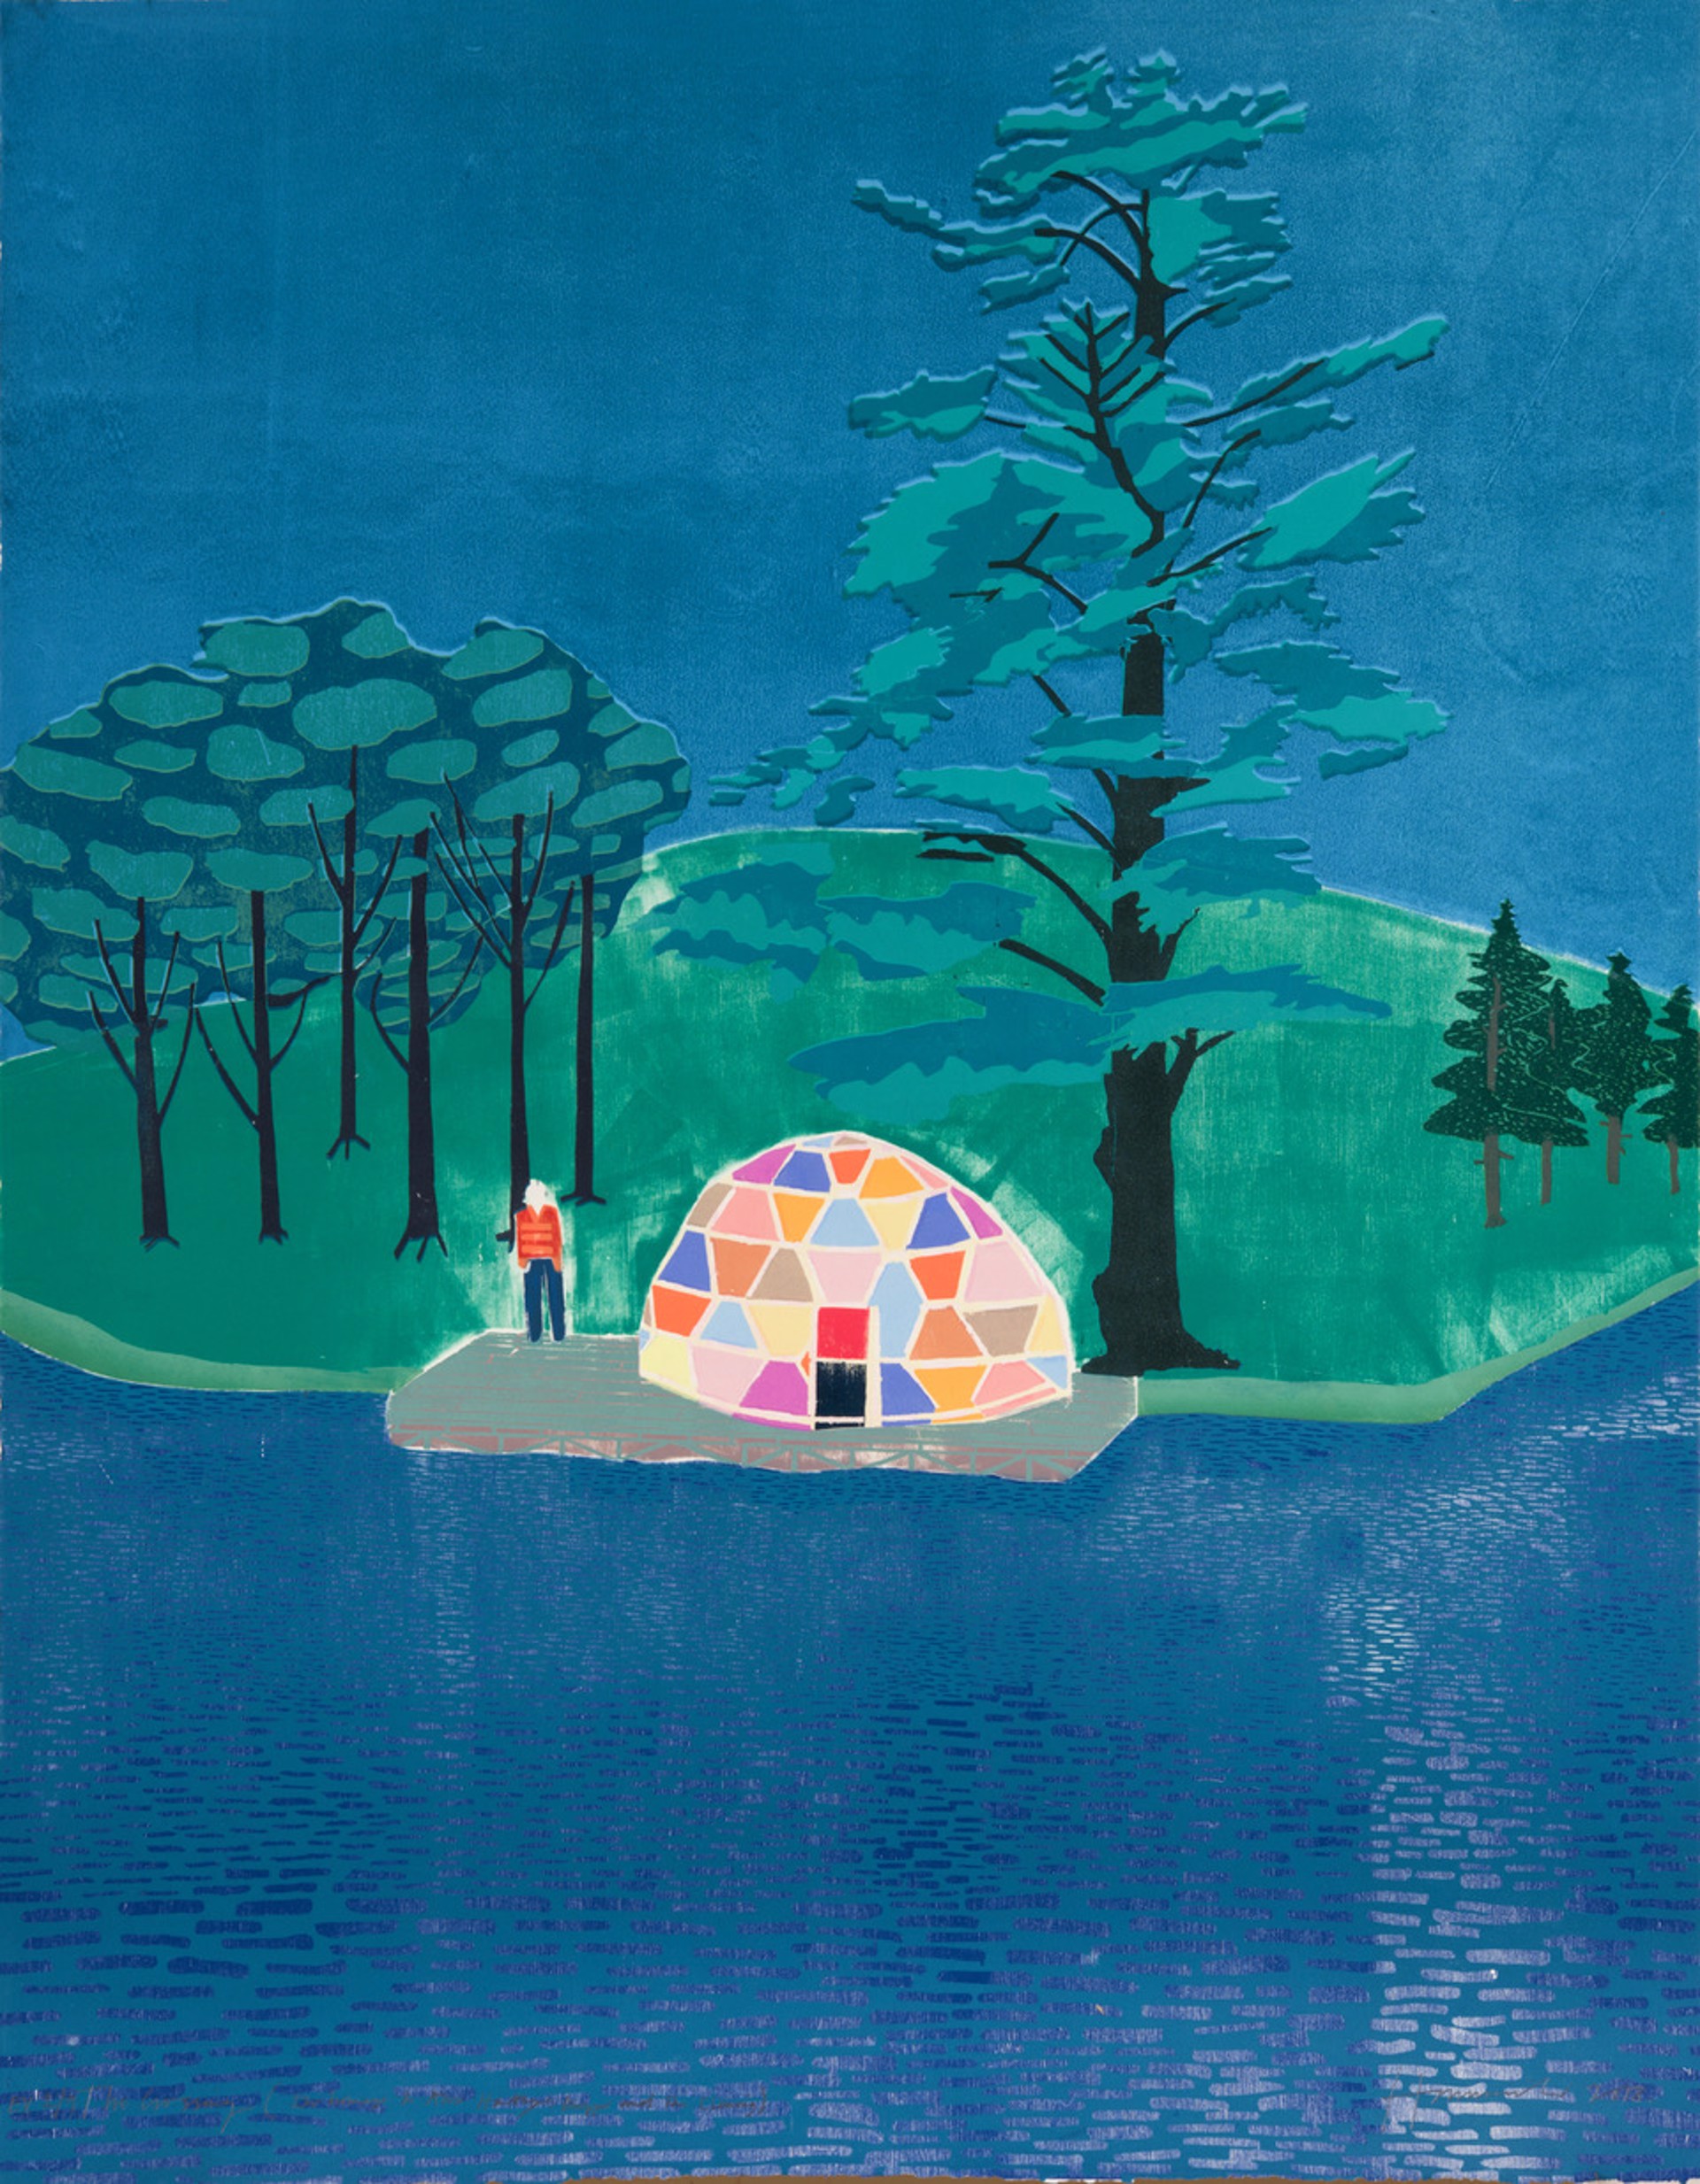 The Crossing by Tom Hammick